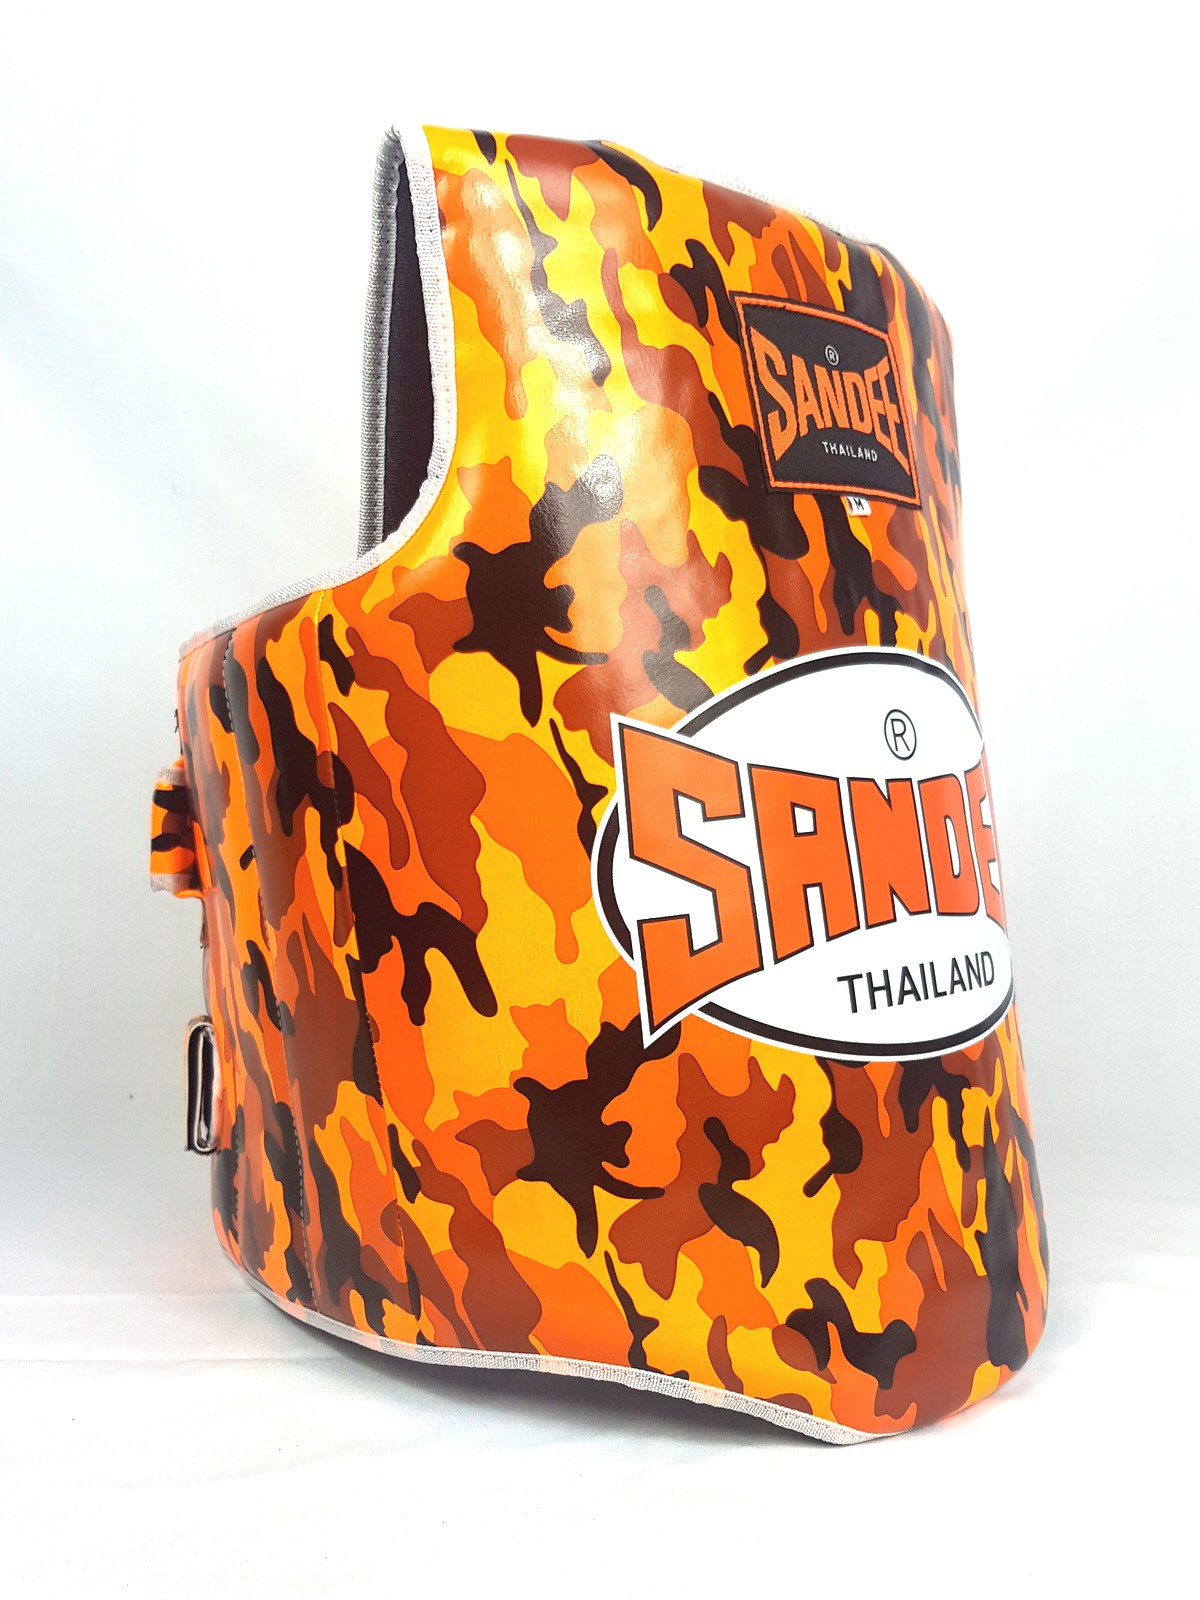 Sandee Body Shield Protection Muay Thai Boxing Synthetic Leather Camo Orange